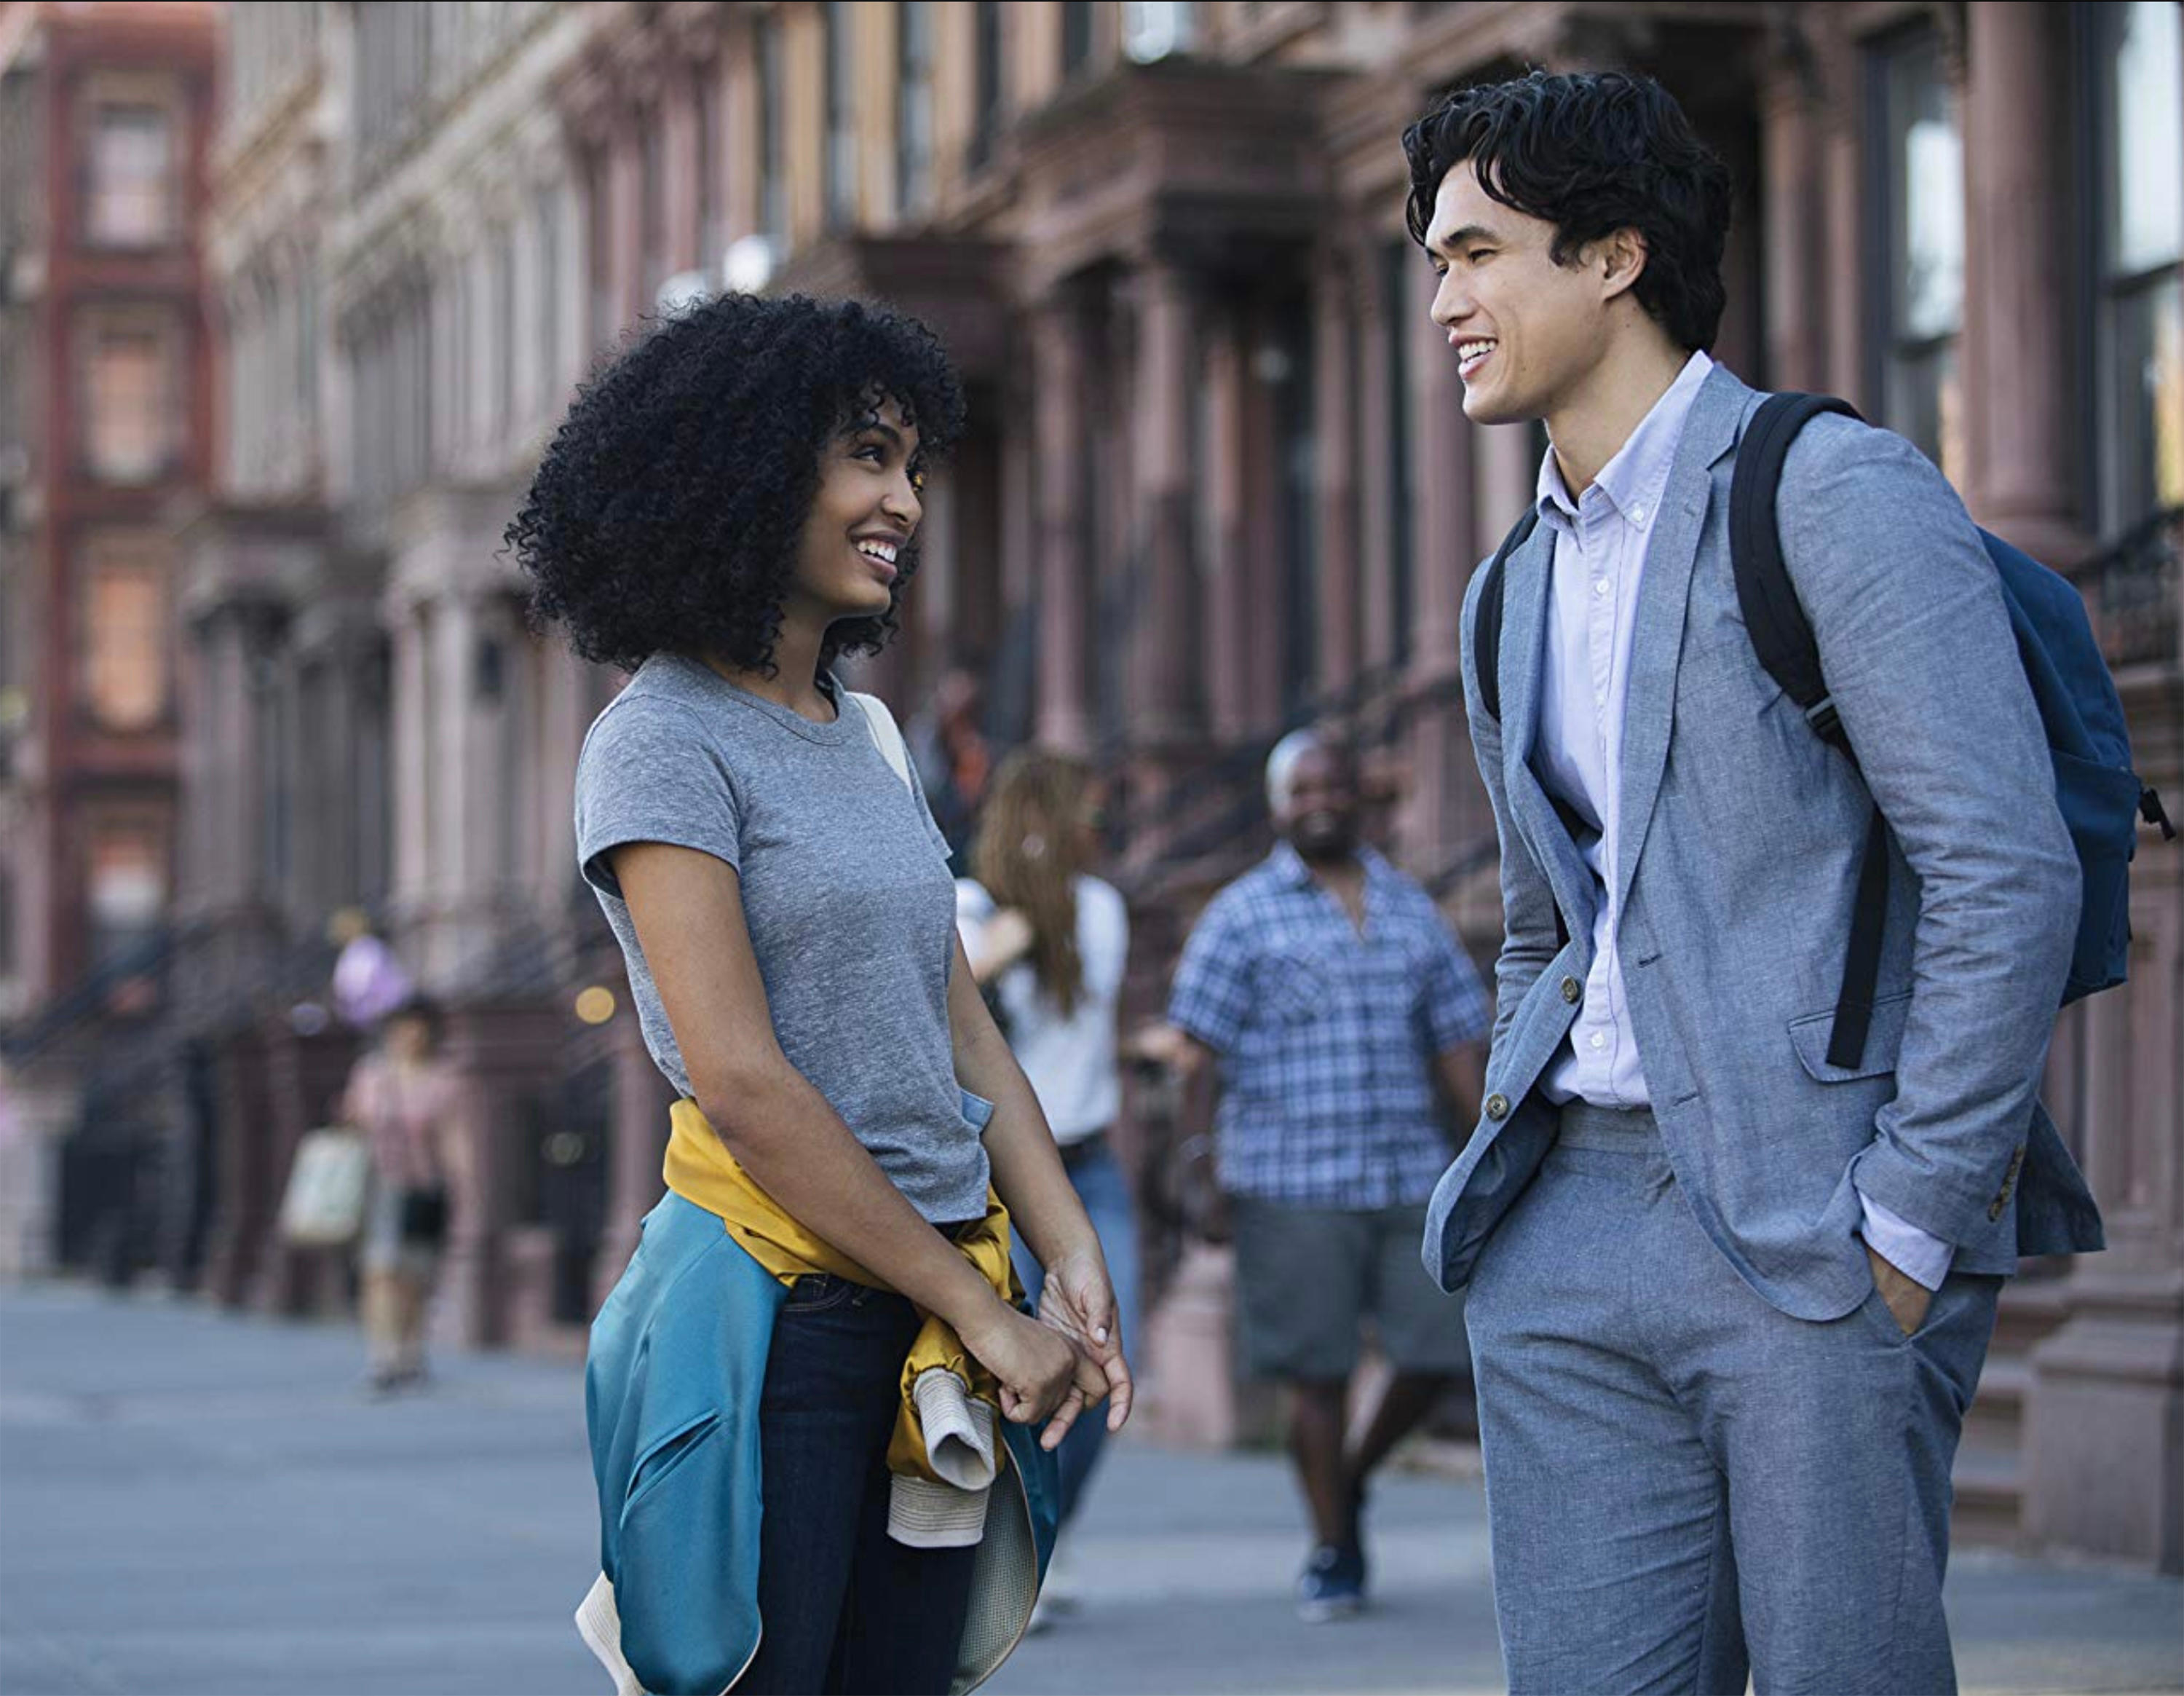 Yara Shahidi and Charles Melton talking on the street in The Sun Is Also a Star